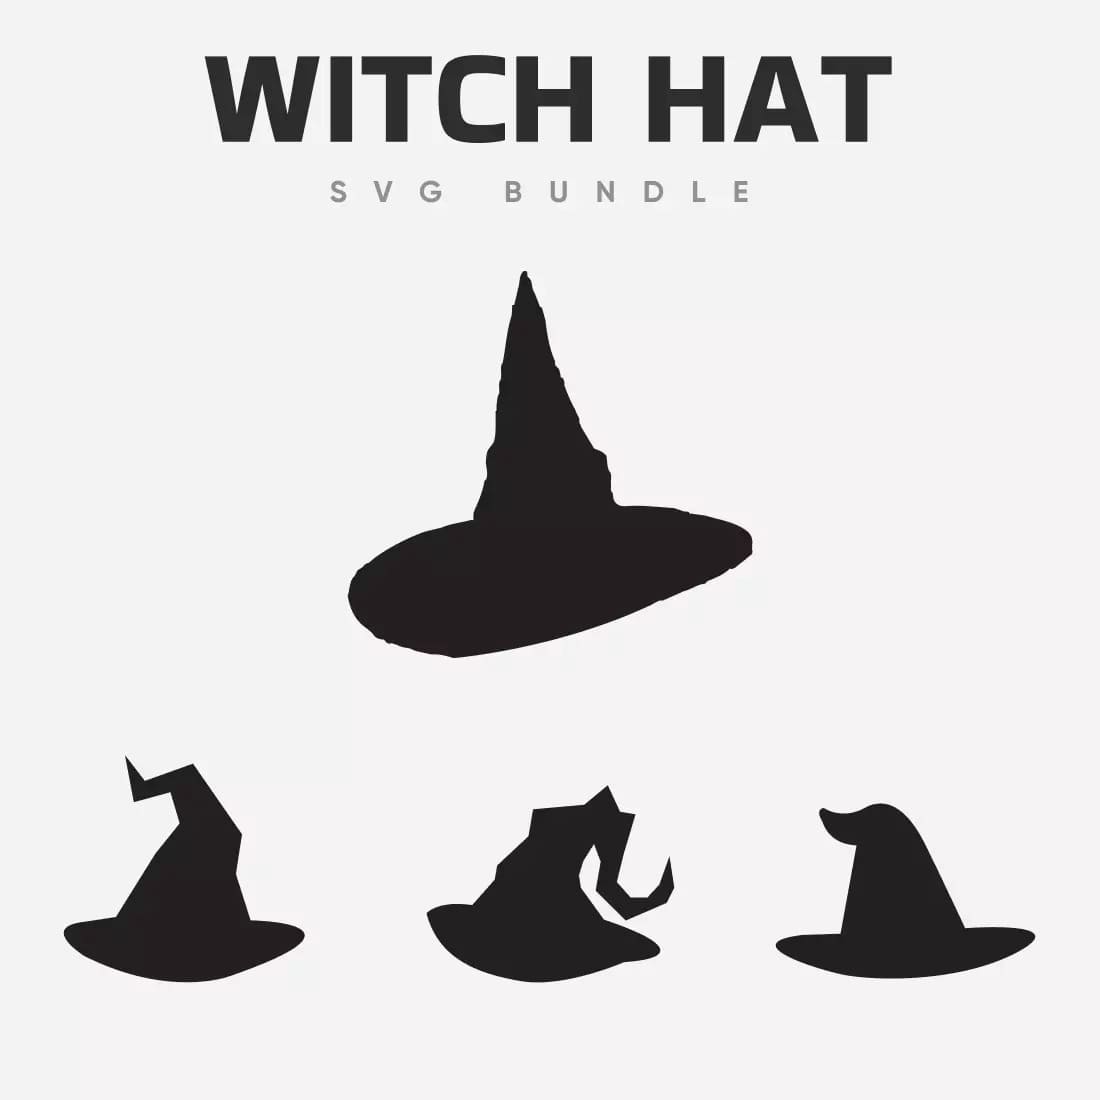 Witch Hat SVG Bundle Preview 2.